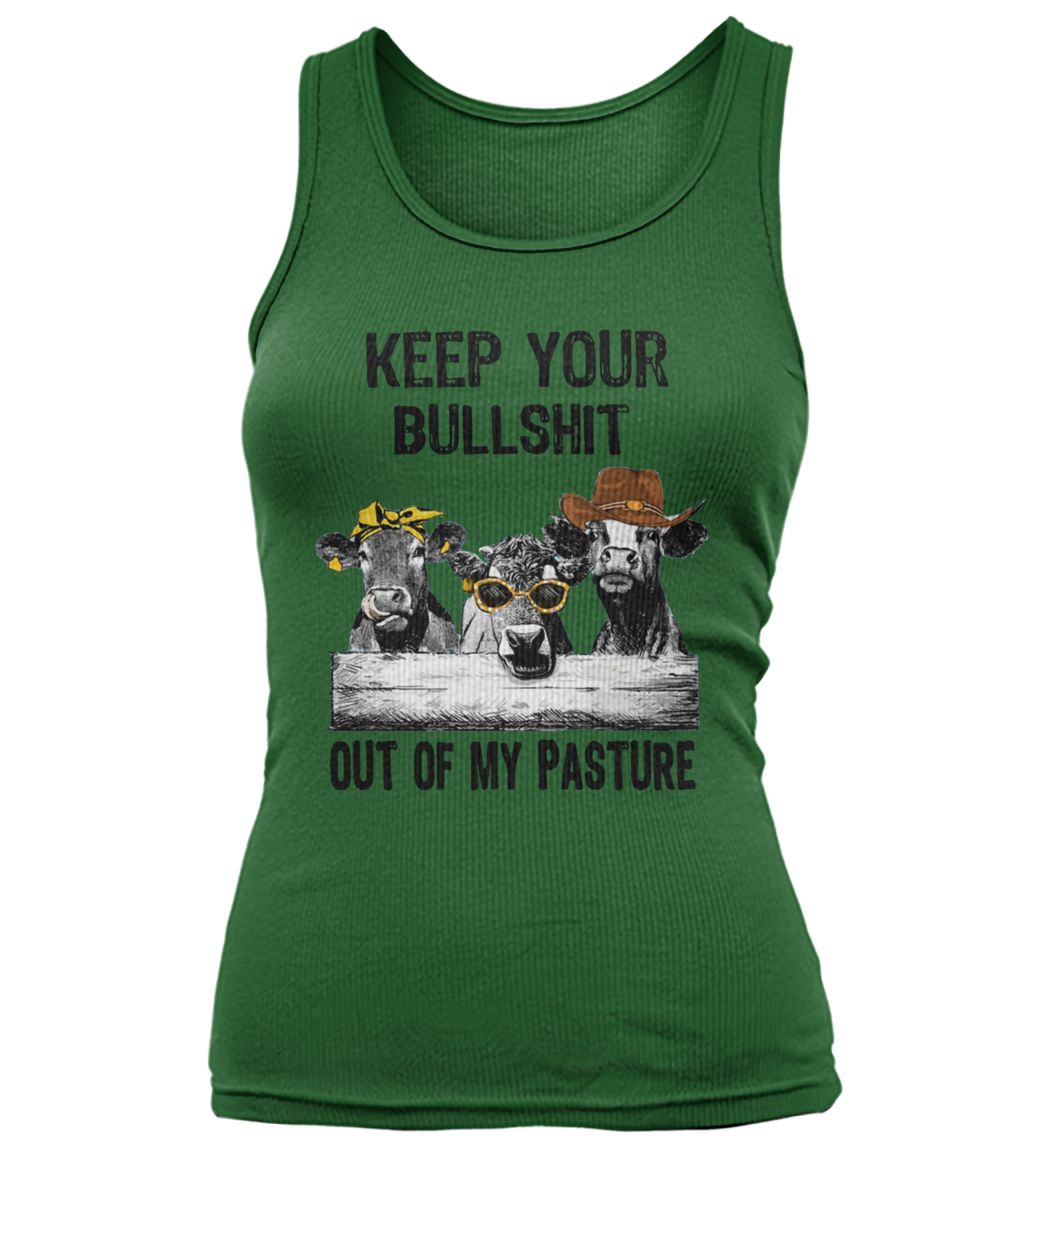 Cows keep your bullshit out of my pasture women's tank top